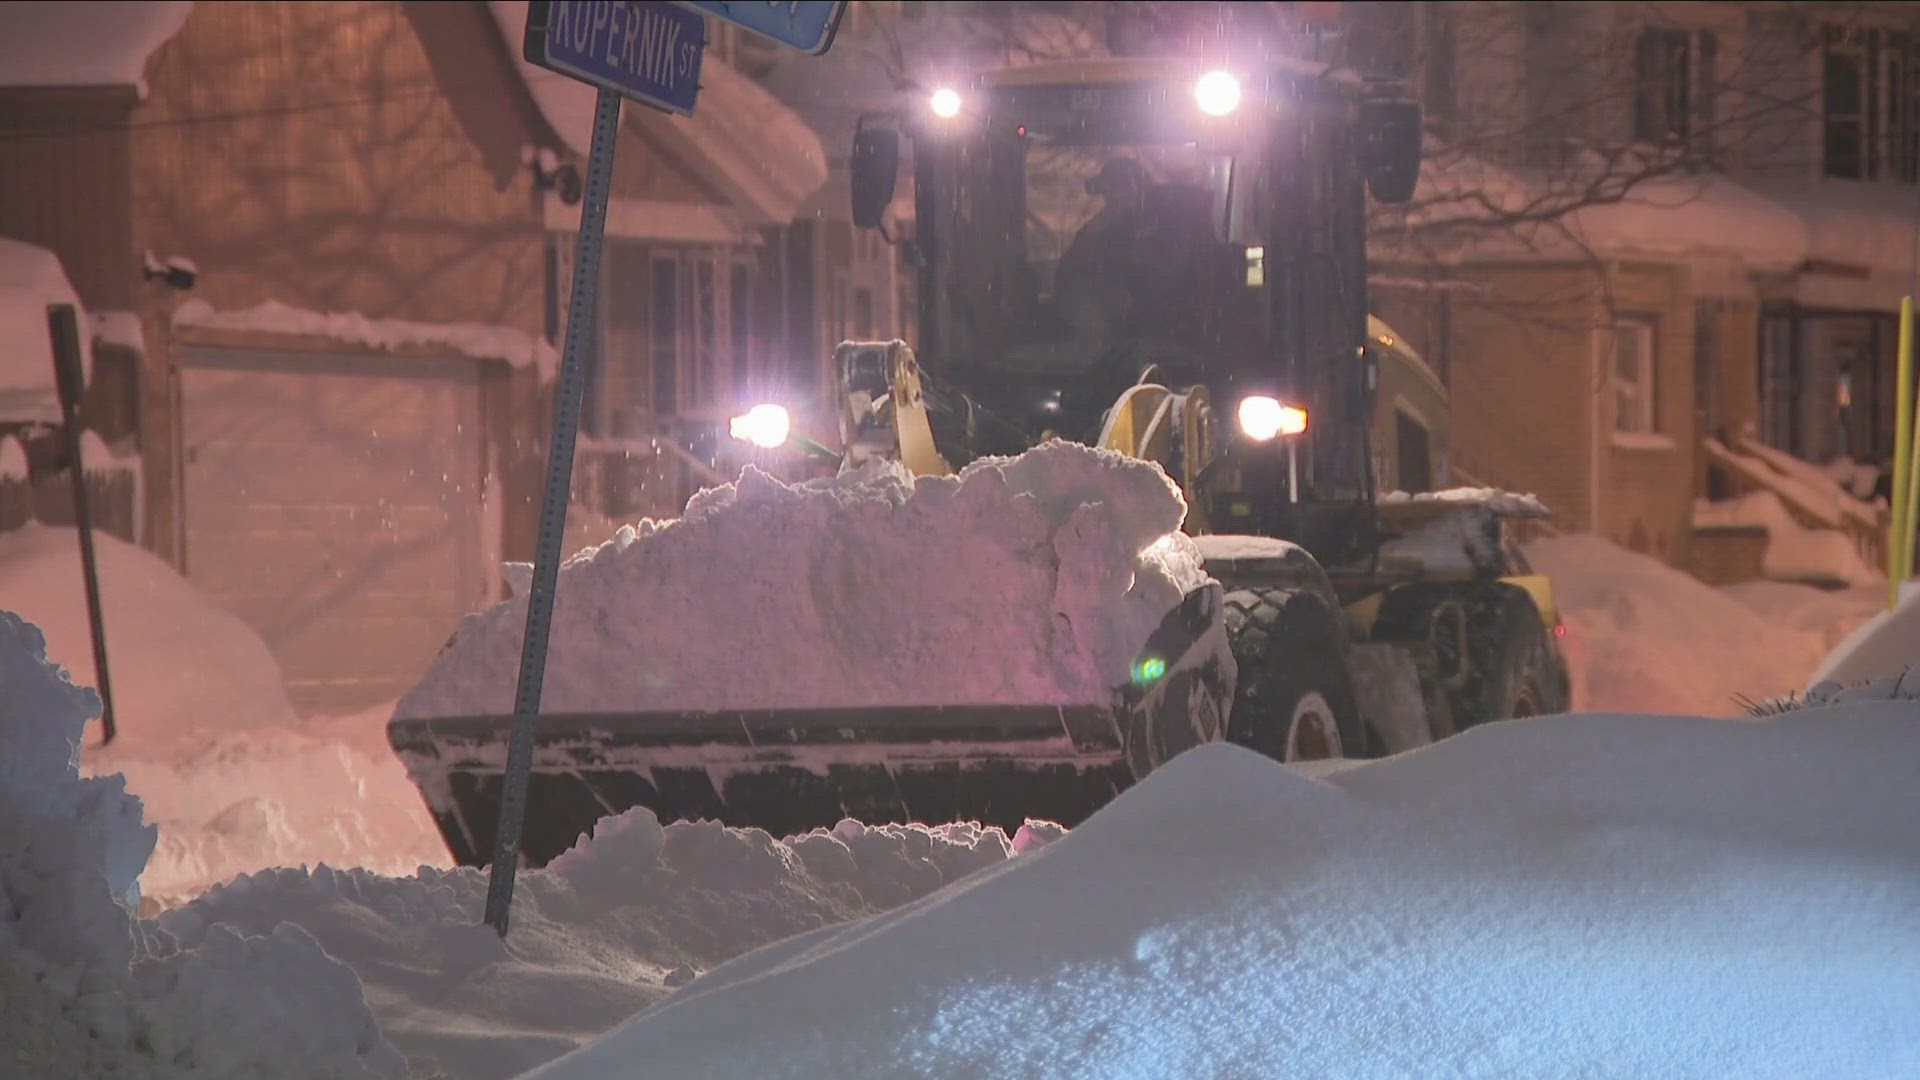 Buffalo snow storm: City to tow cars to clear streets